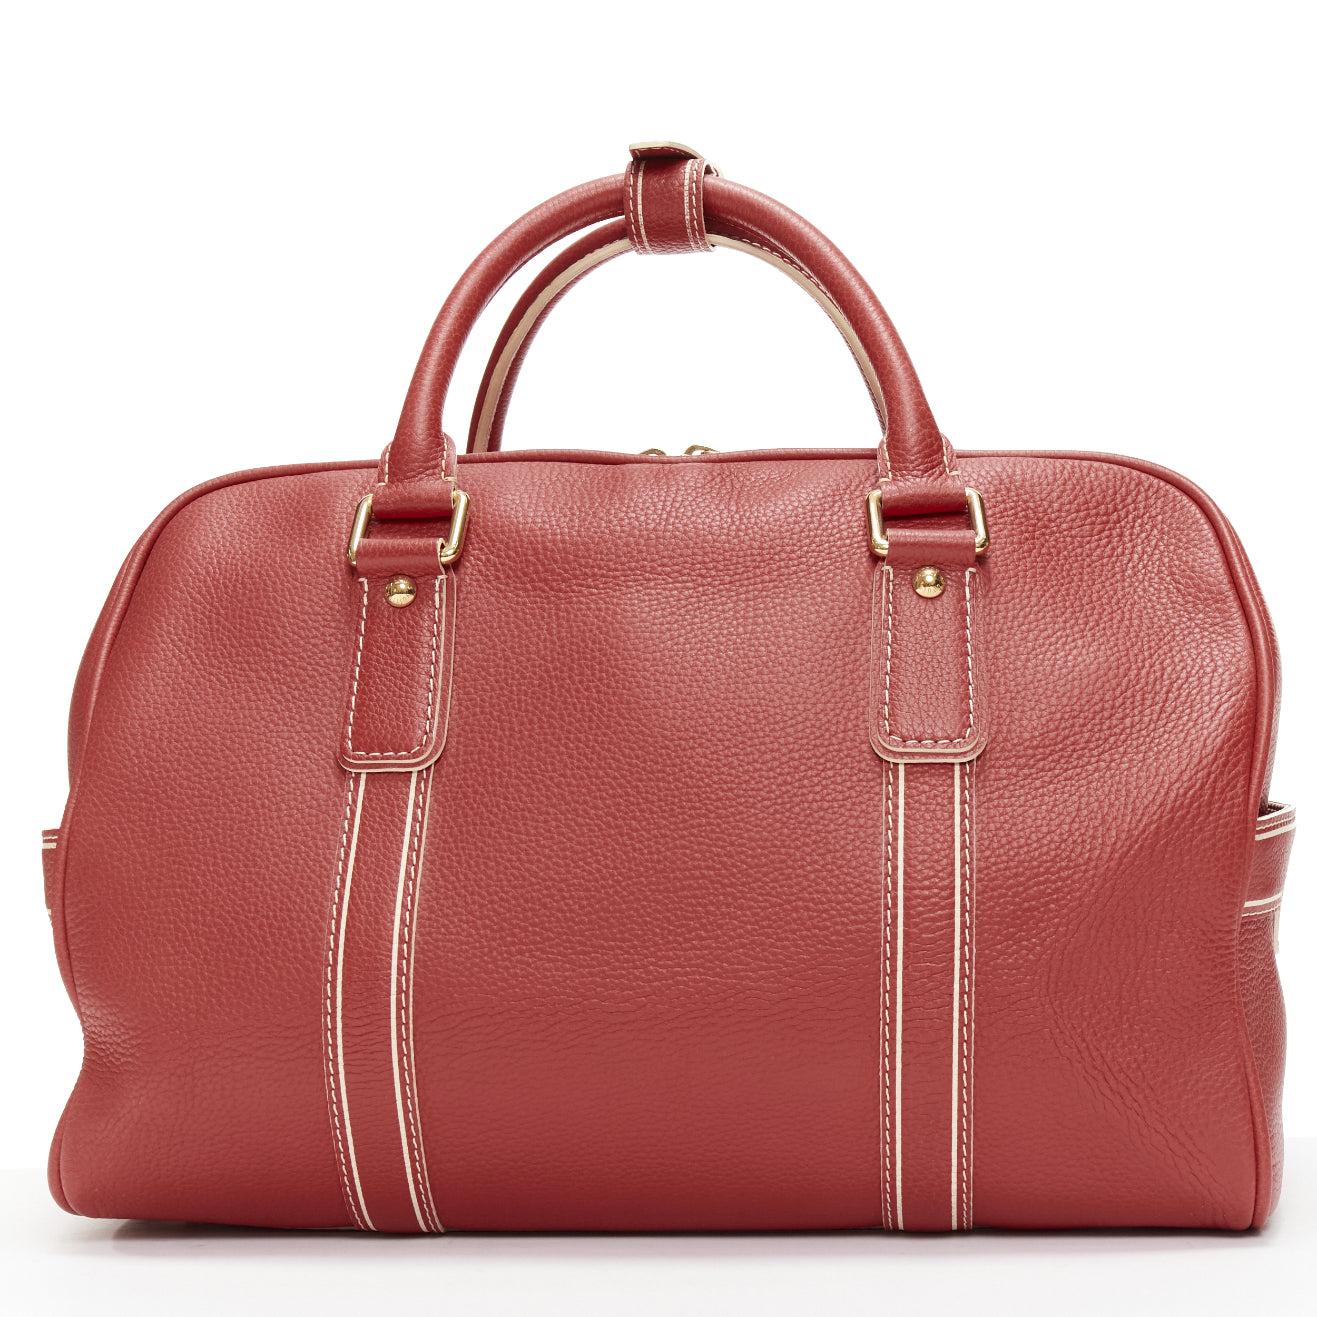 Women's LOUIS VUITTON Red Tobaco Leather Carryall Boston Duffle top handle travel bag For Sale